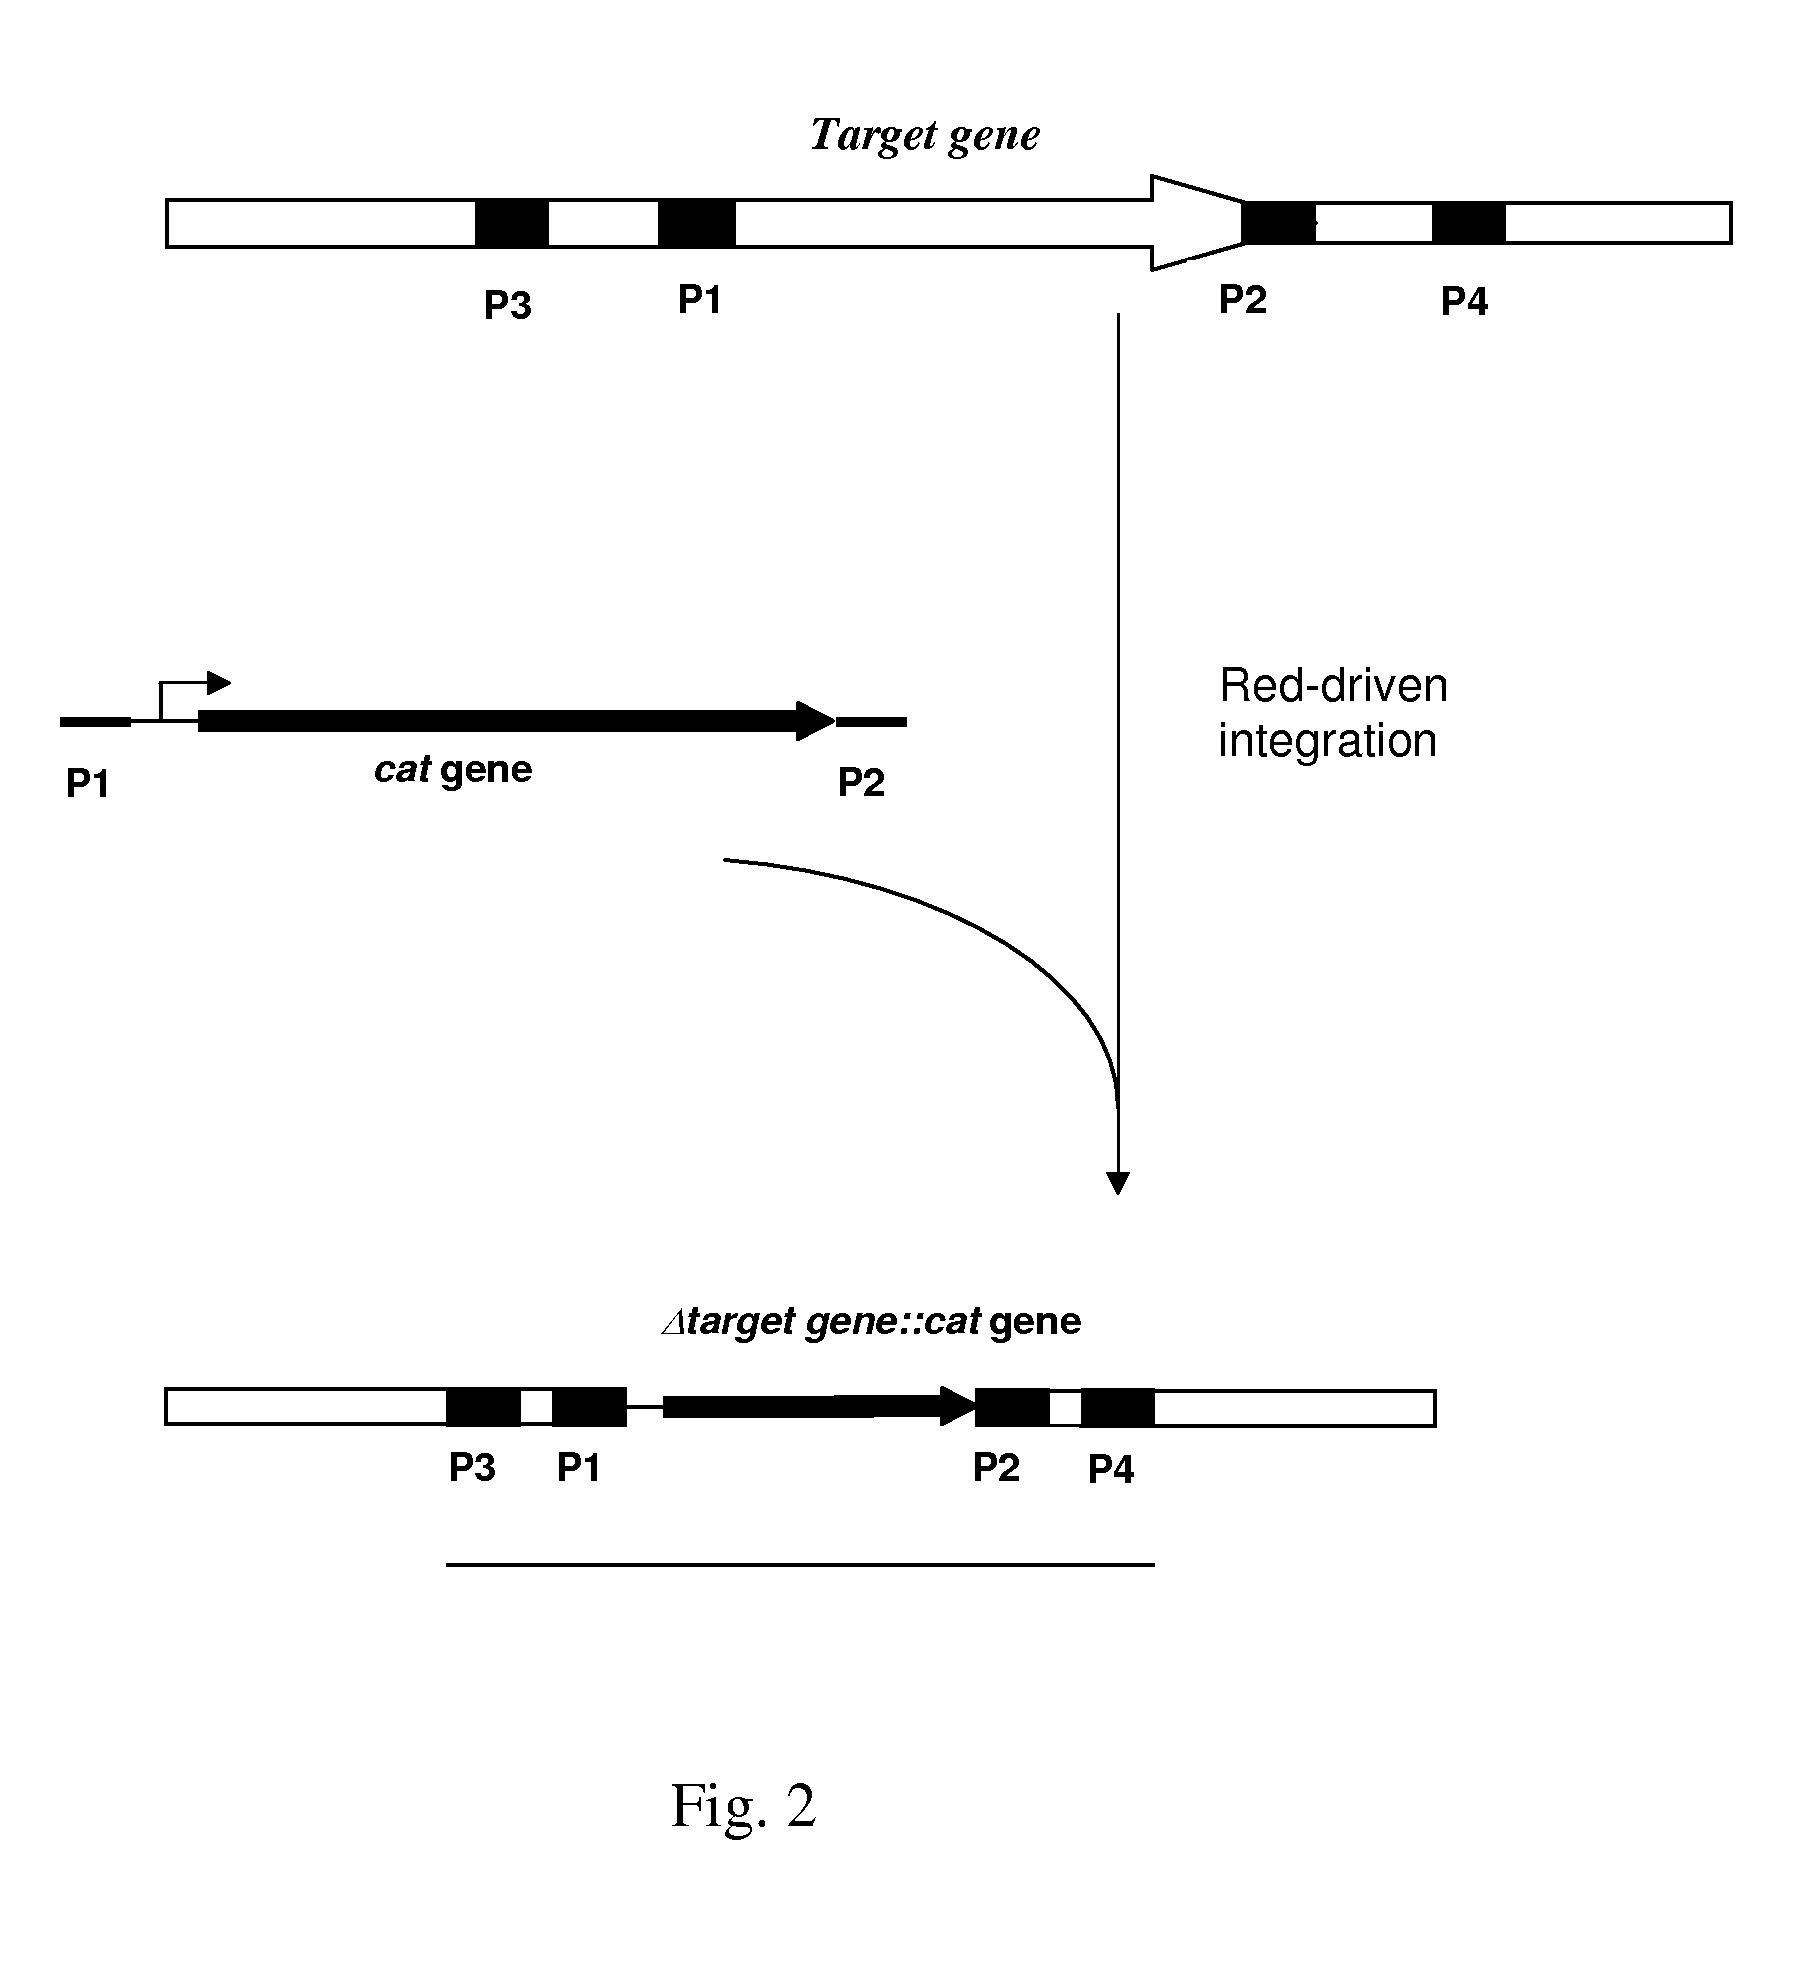 Method for producing an l-amino acid using bacterium of the enterobacteriaceae family with attenuated expression of a gene coding for small RNA